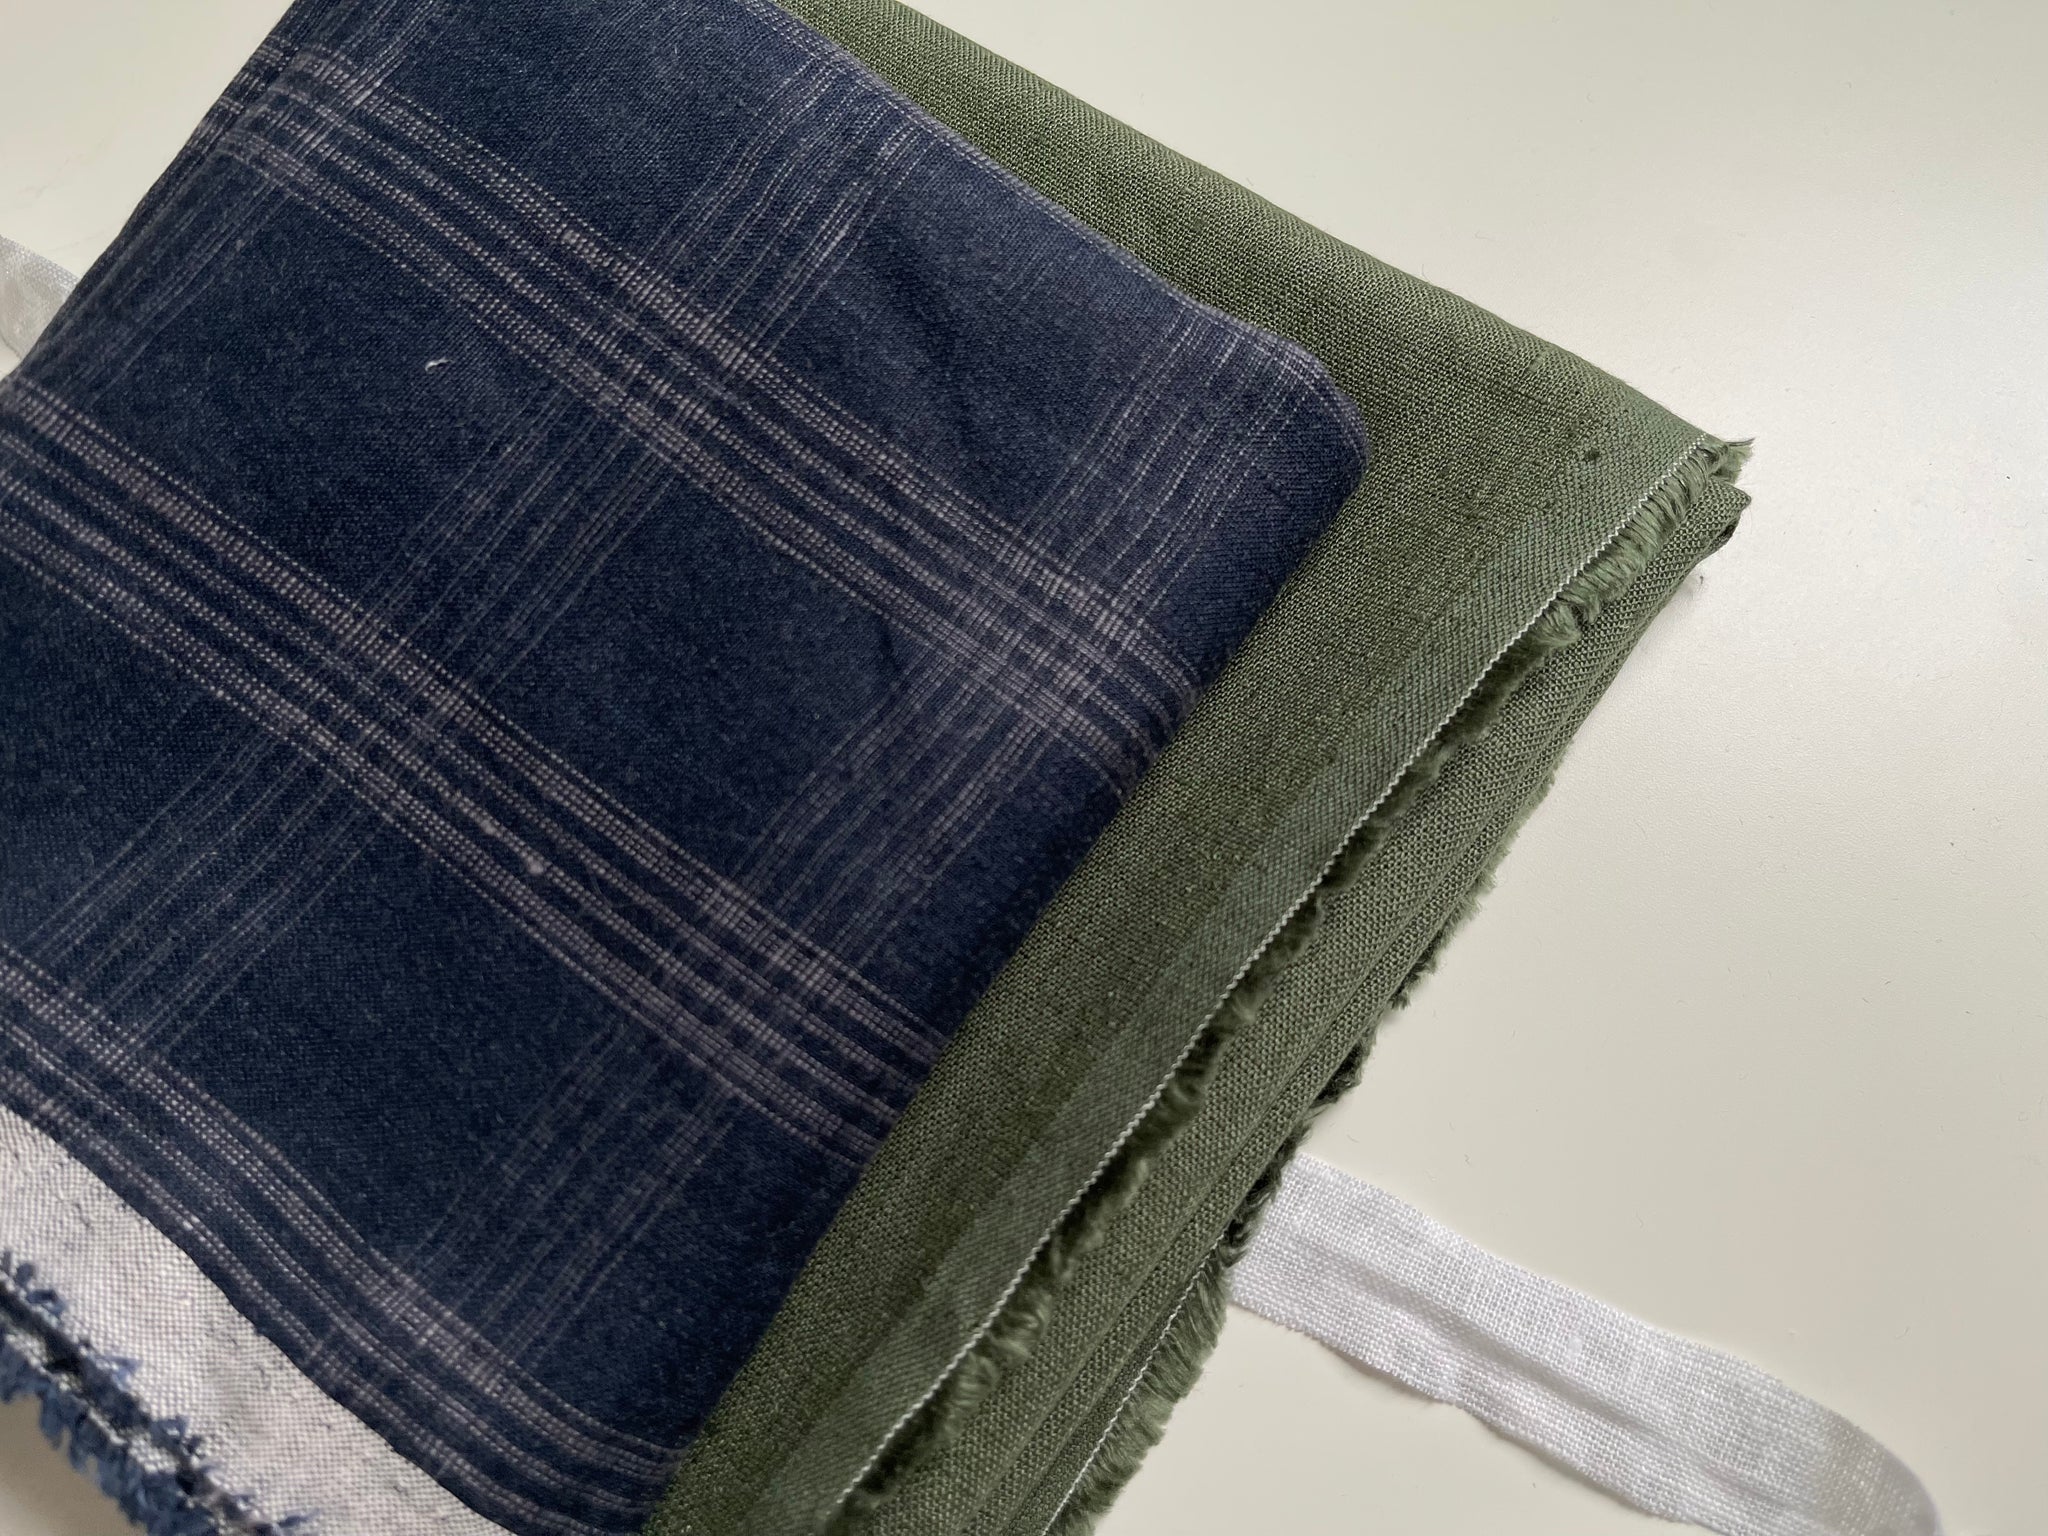 Linen Fabric Remnants - Navy Plaid and Beetle